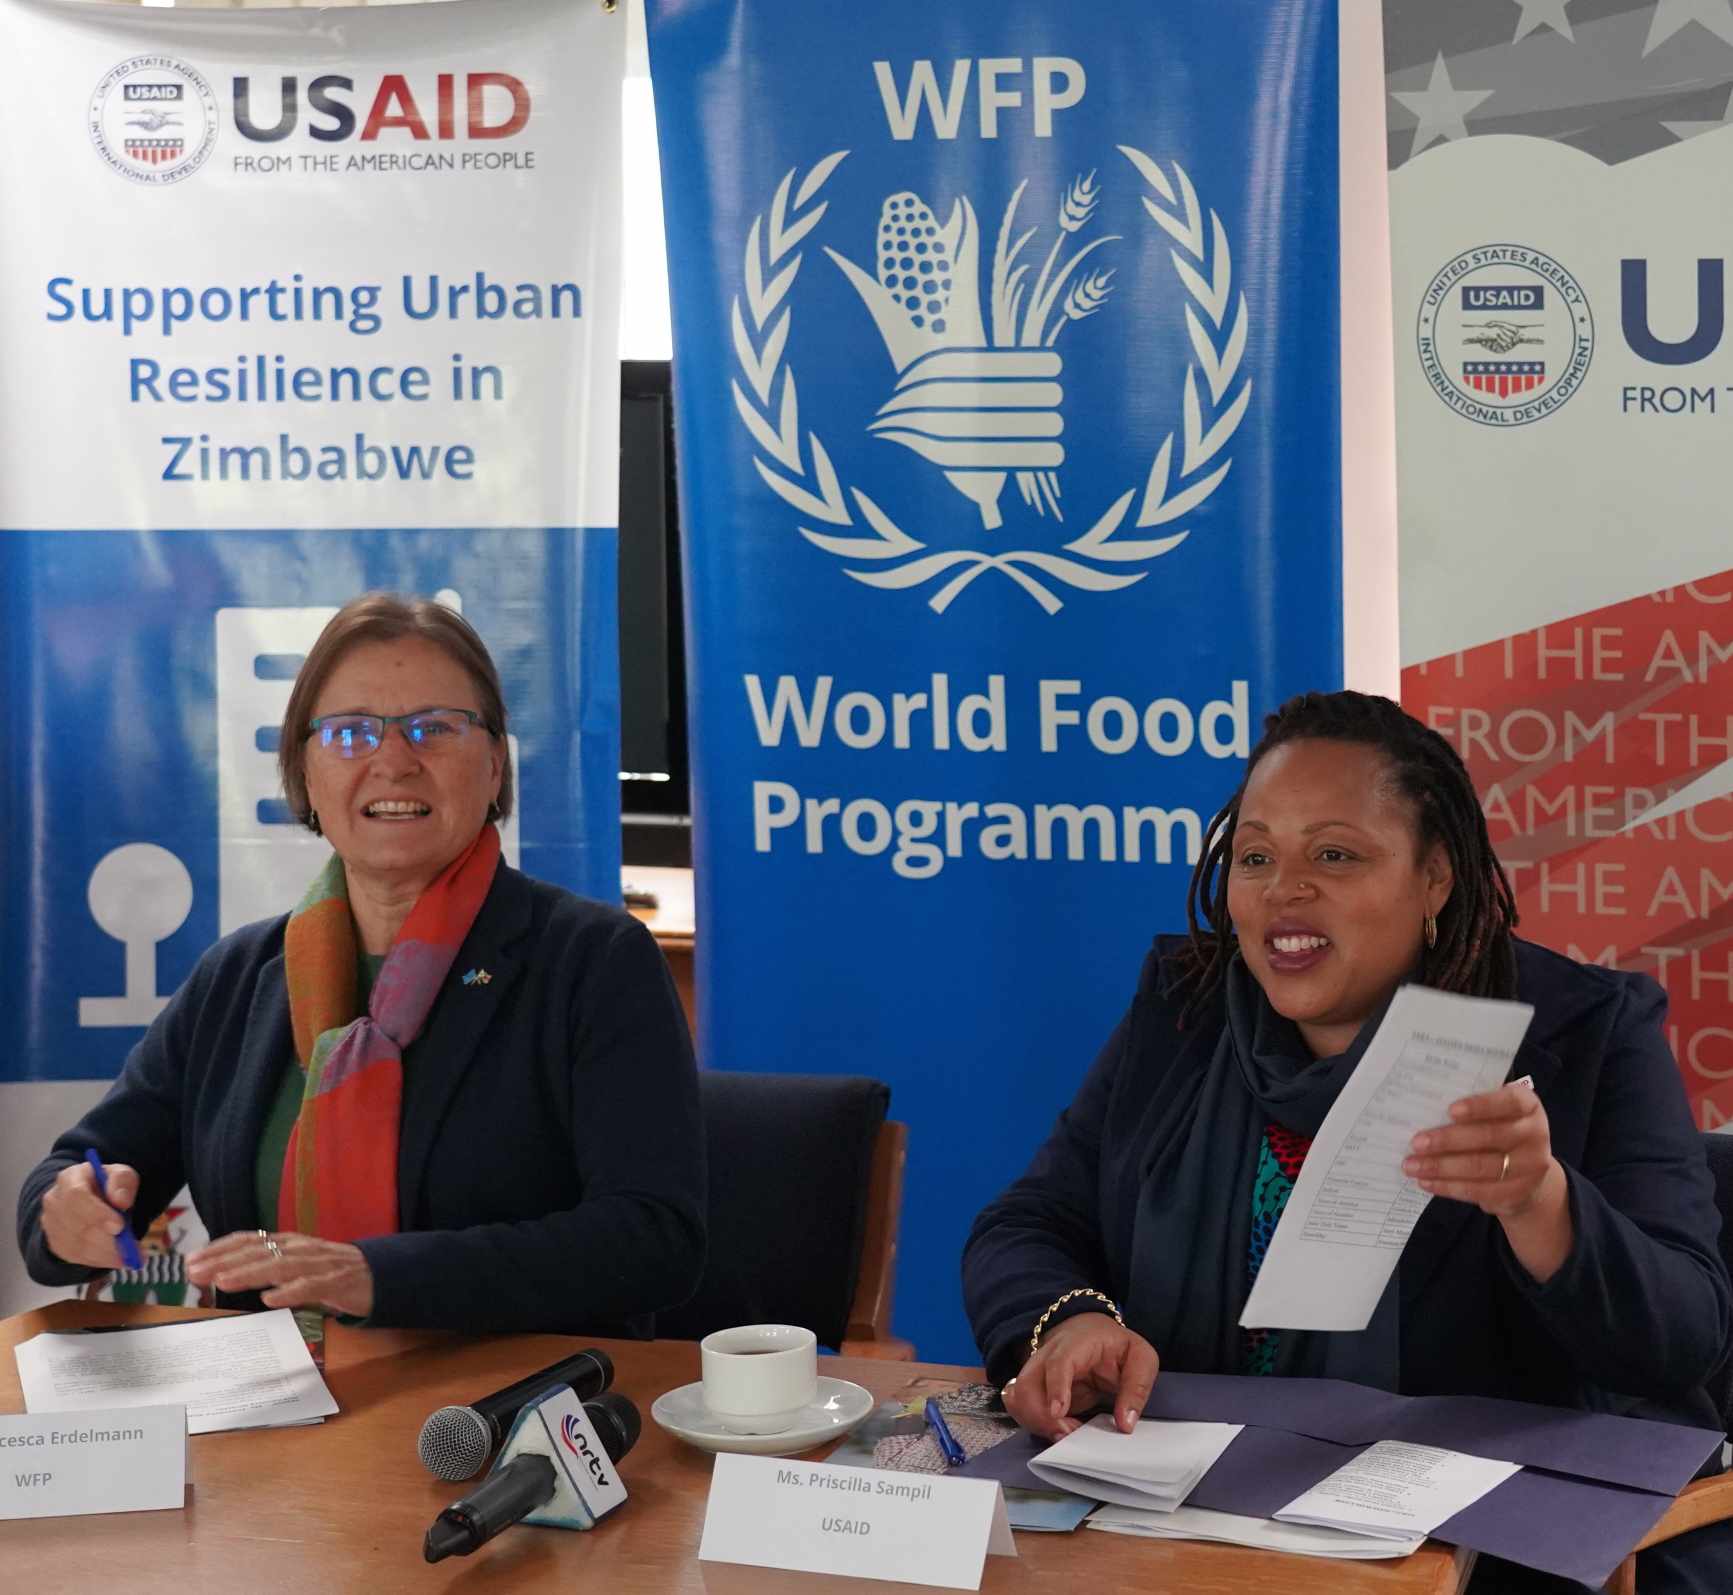 USAID enables WFP to provide support to Zimbabwe’s urban communities